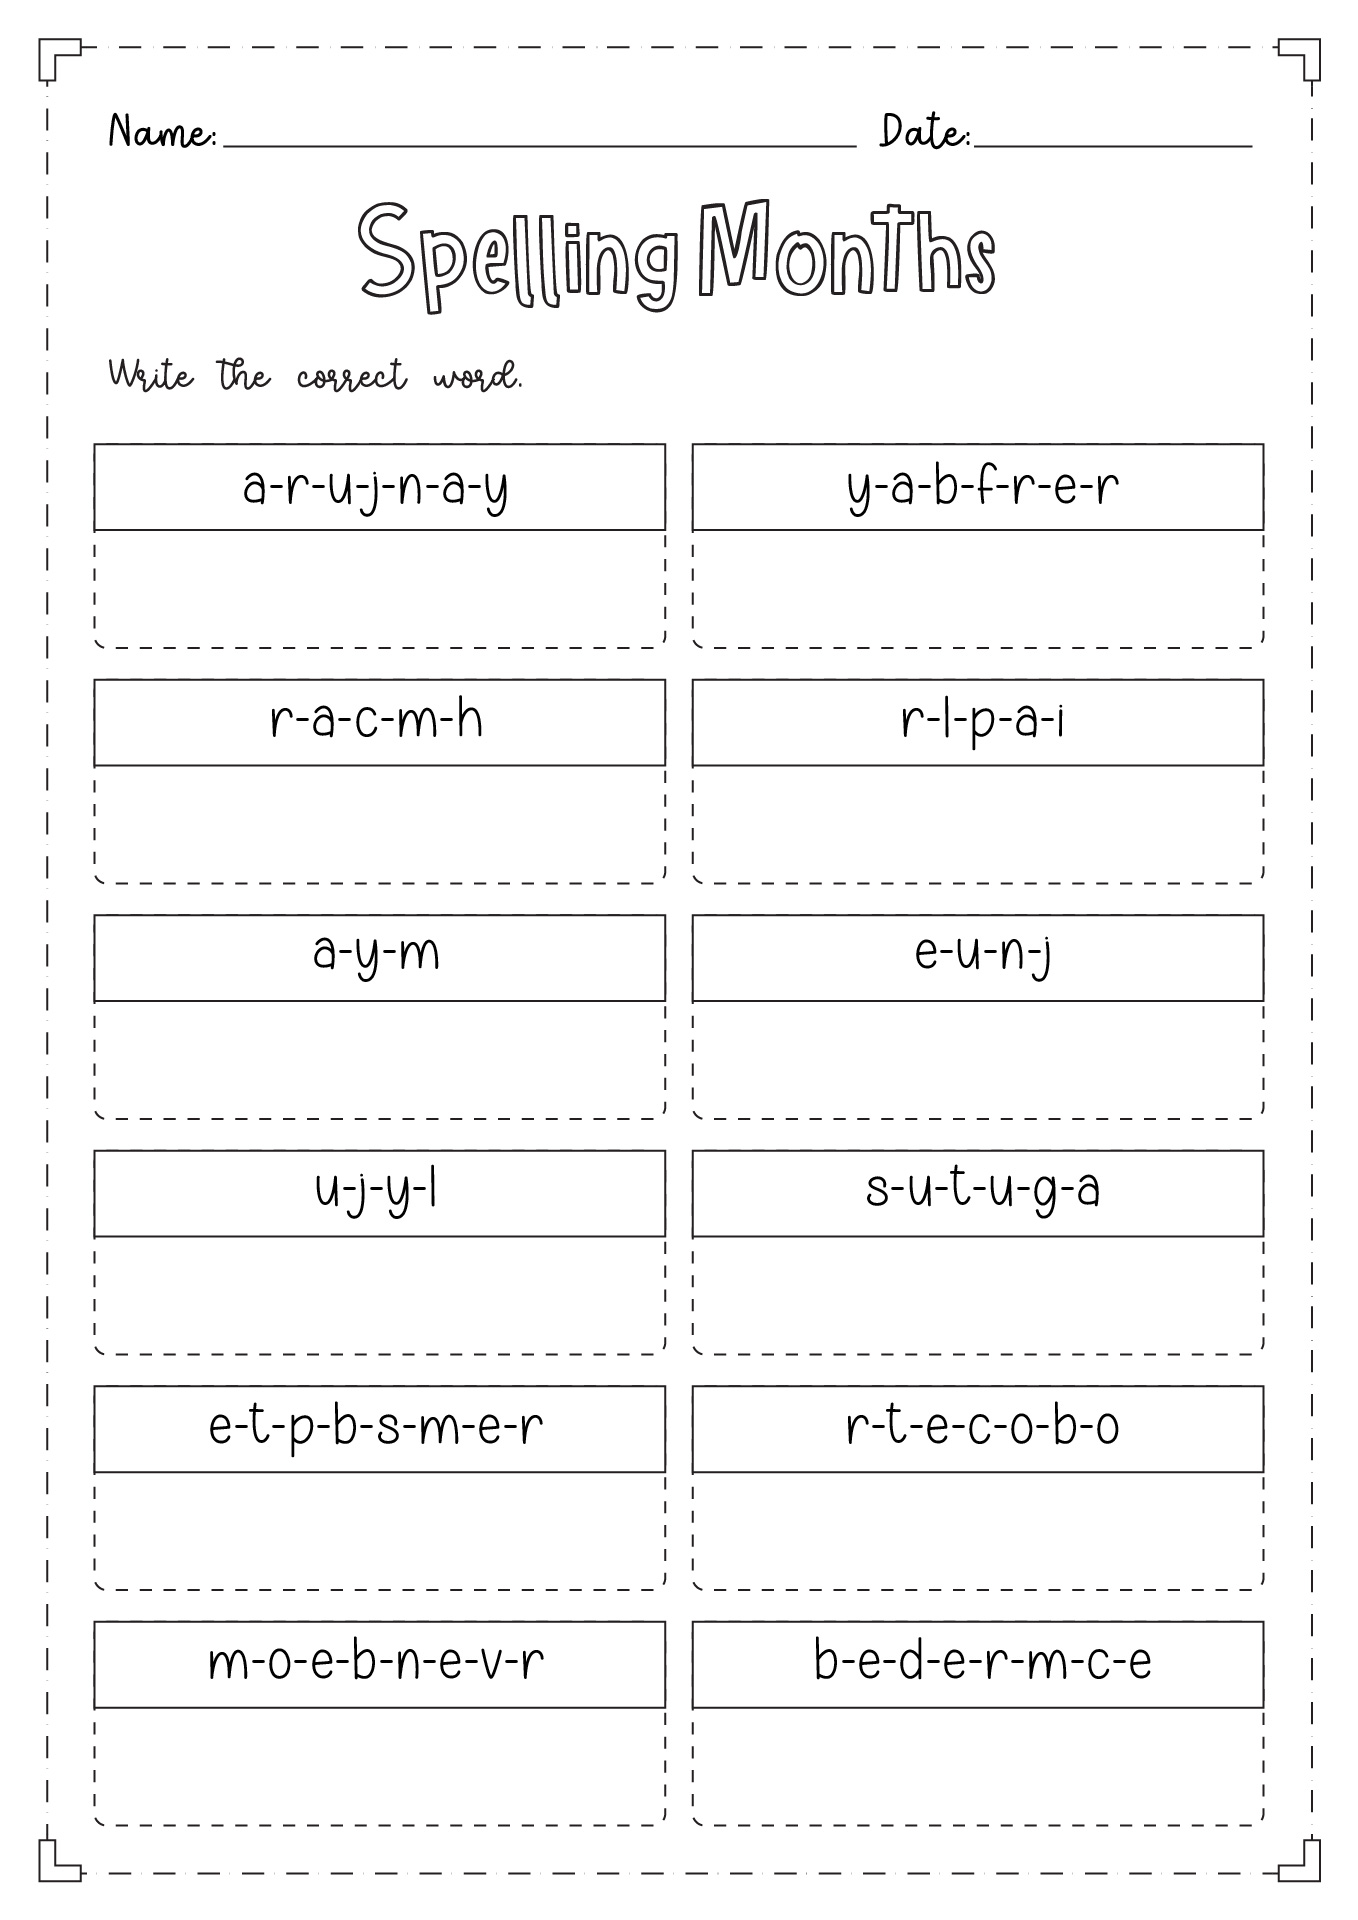 Months of the Year Spelling Worksheet Image